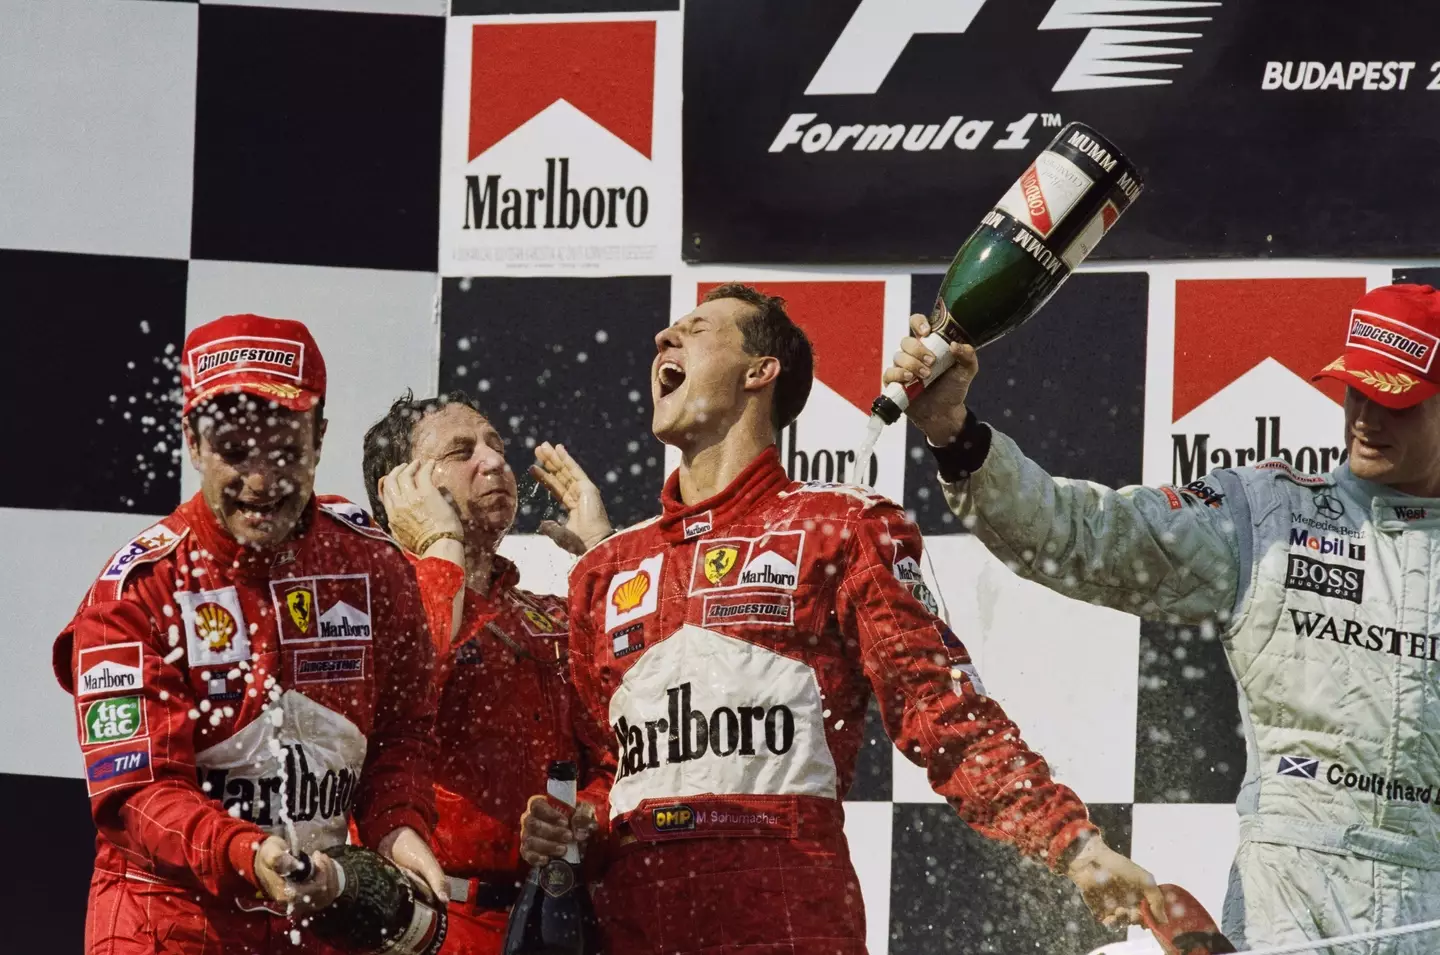 Michael Schumacher celebrates on the podium after winning a race. Image: Getty